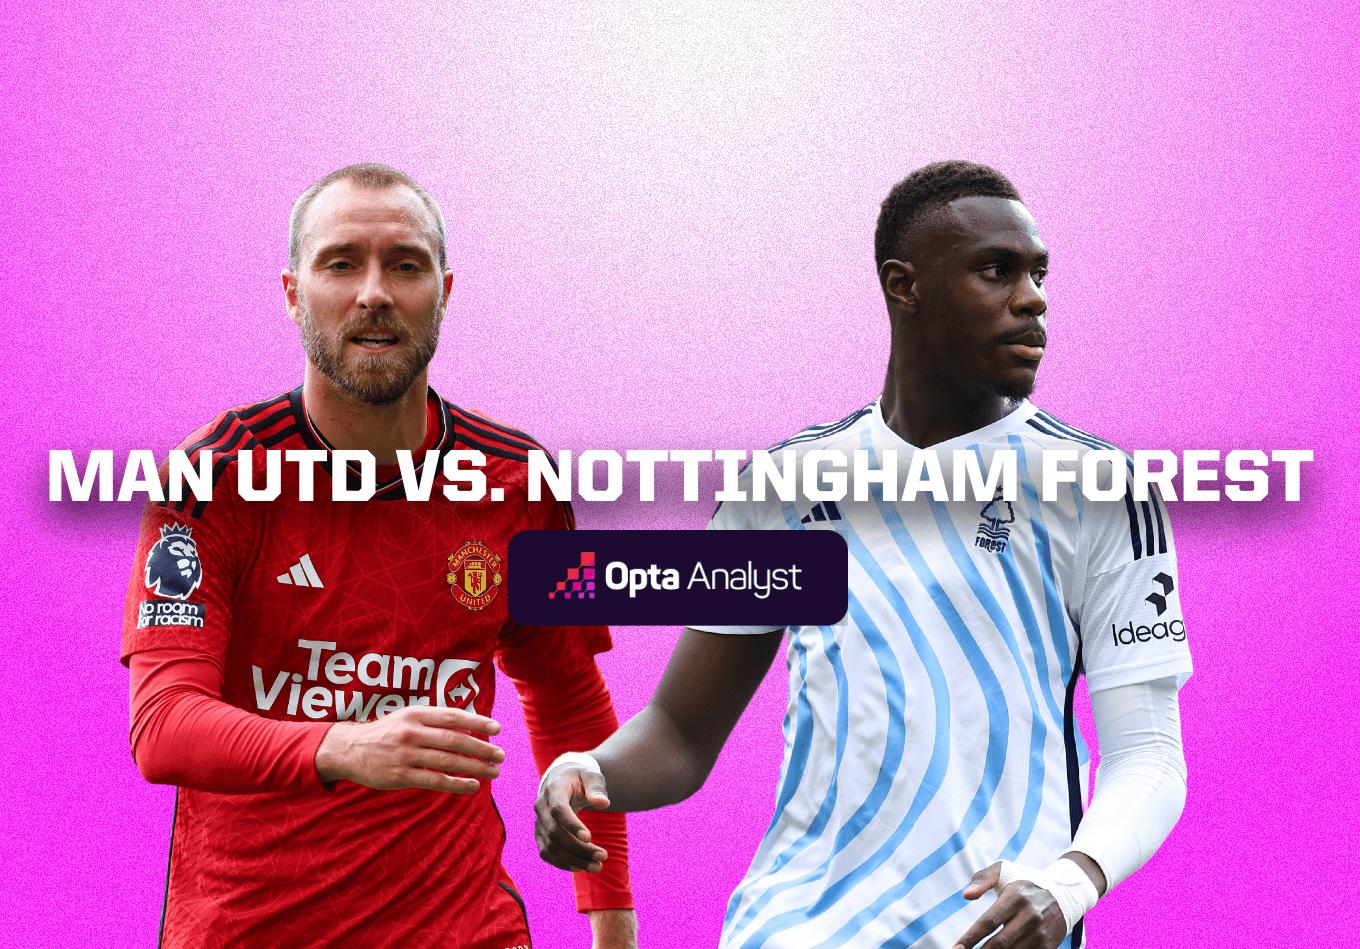 Manchester United vs Nottingham Forest: Prediction and Preview